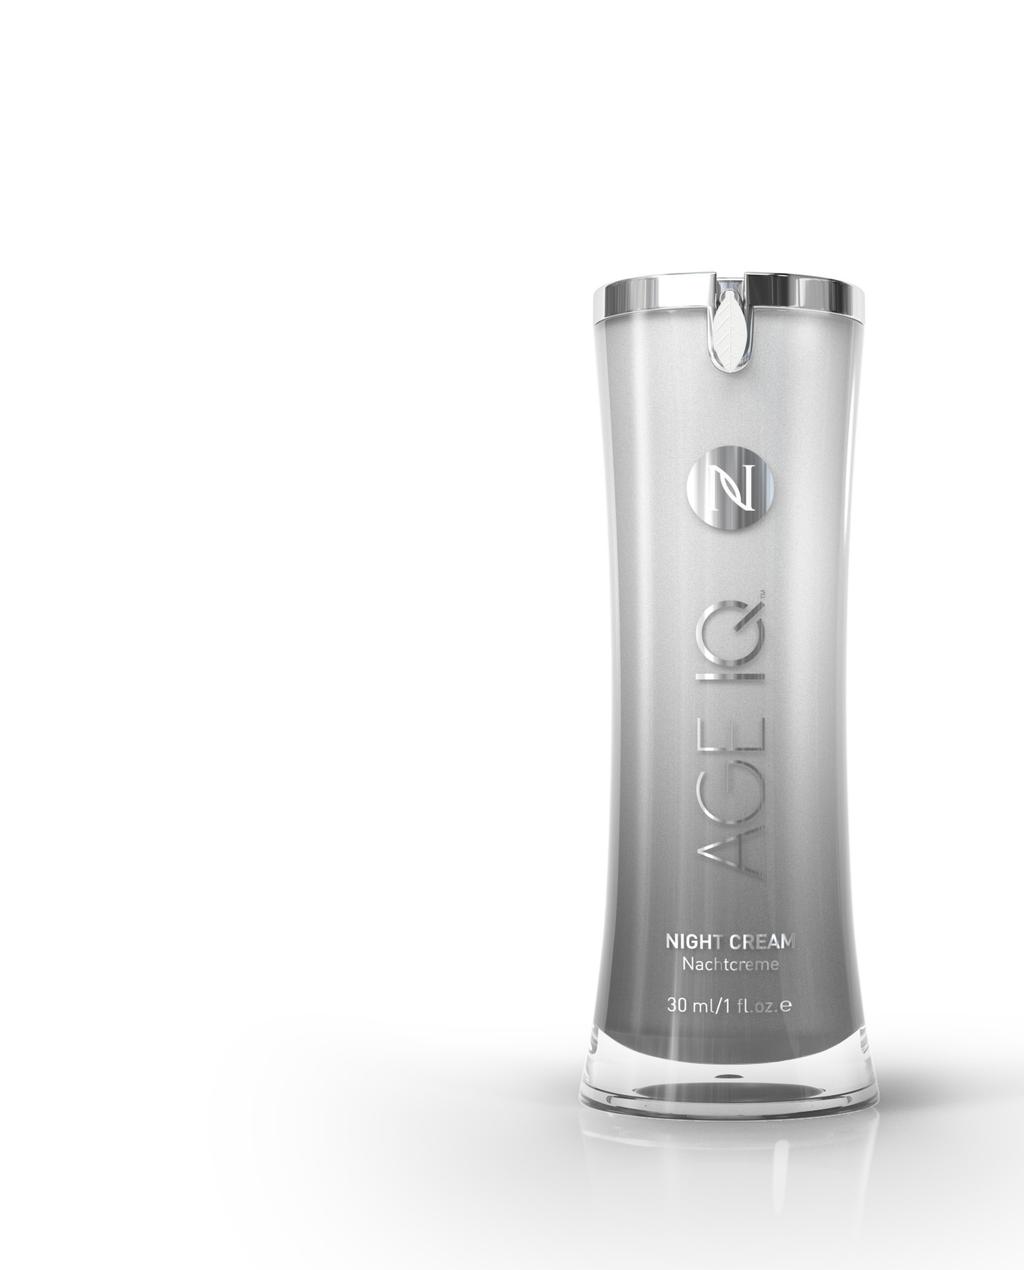 Introducing Age IQ Night Cream INTELLIGENT SKINCARE HAS ARRIVED WAKE TO A YOUNGER, HEALTHIER-LOOKING REFLECTION Introducing the next generation of age-fighting skincare.